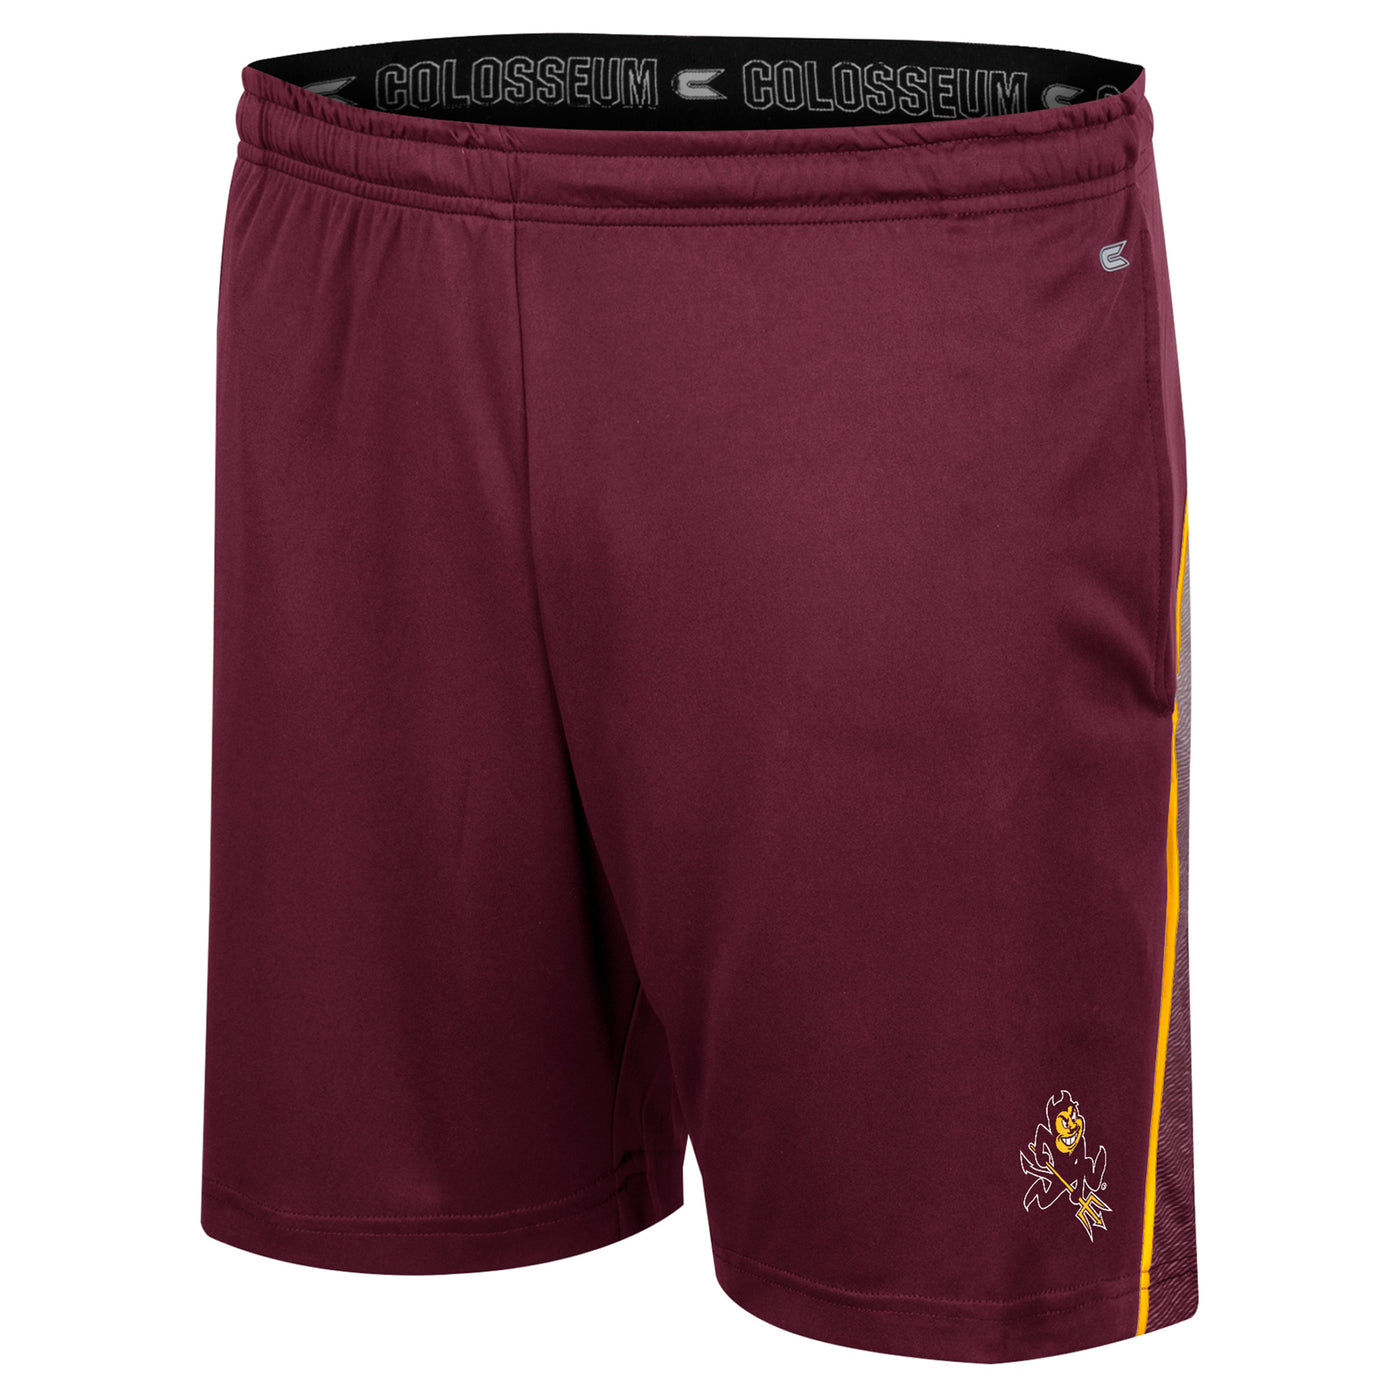 Mens maroon, athletic, shorts. Sparky mascot on bottom corner. Vertical gold strip down the side of the short.